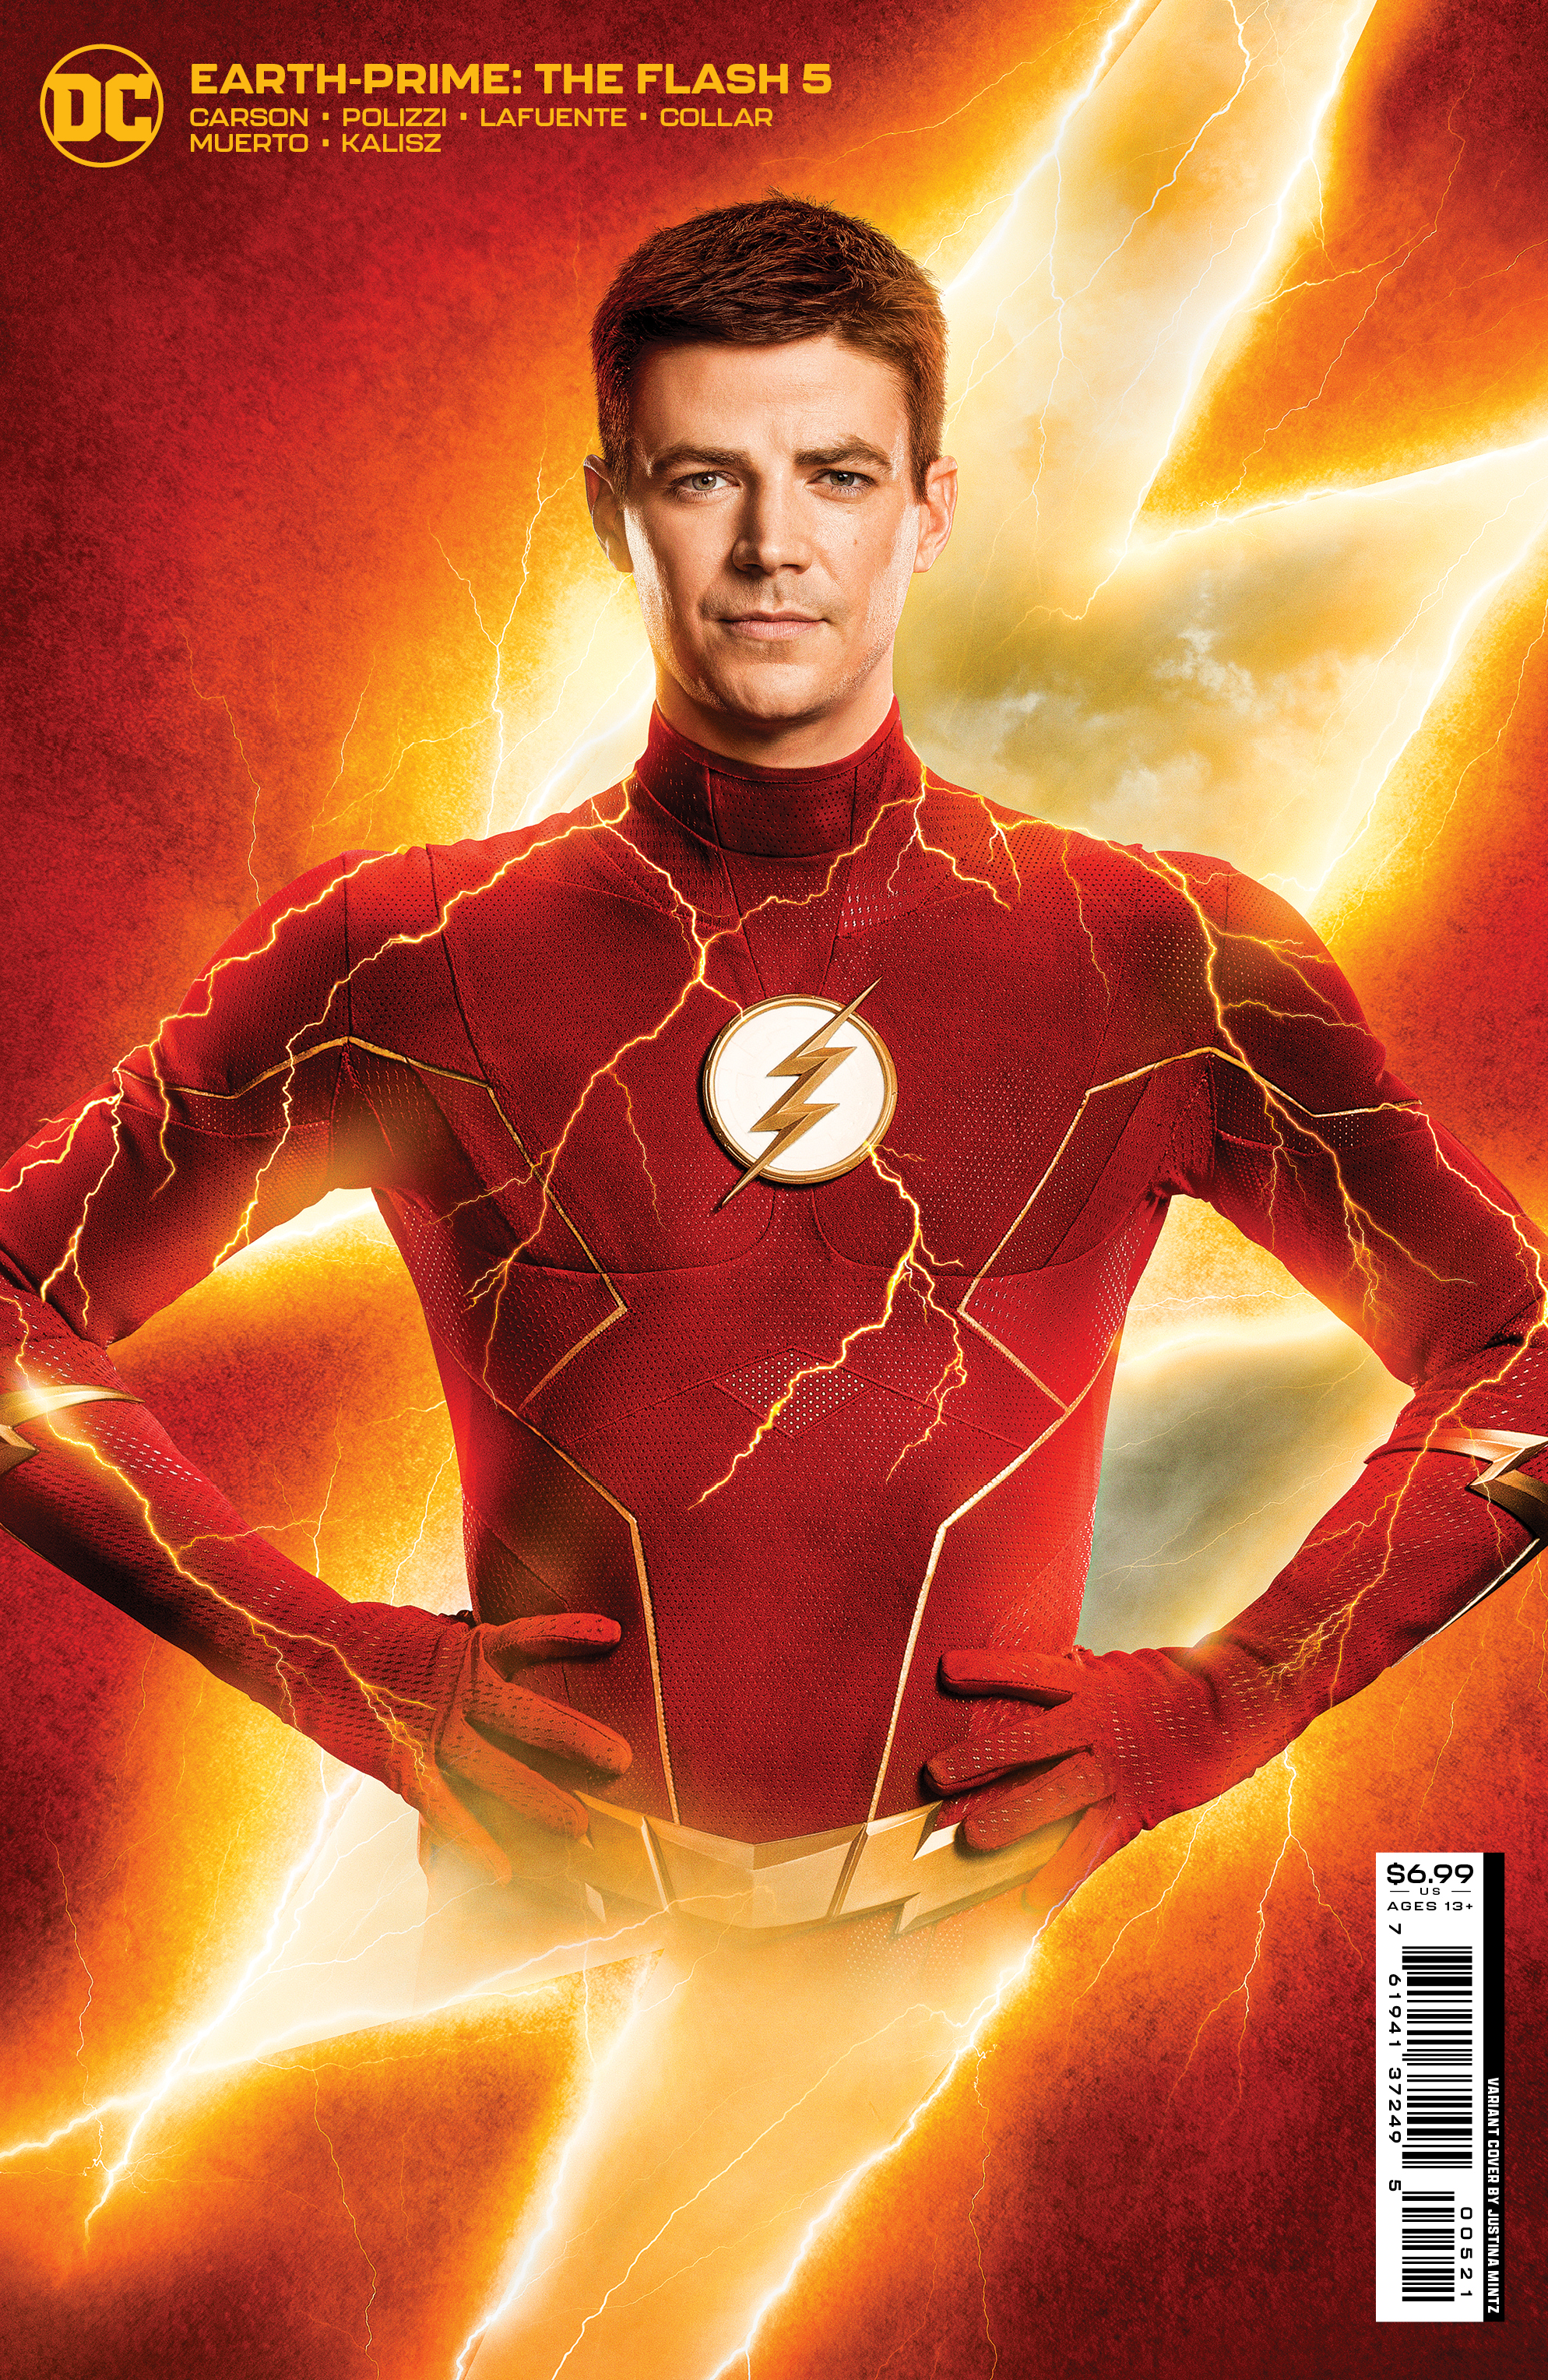 Earth-Prime #5 The Flash Cover B Photo Card Stock Variant (Of 6)